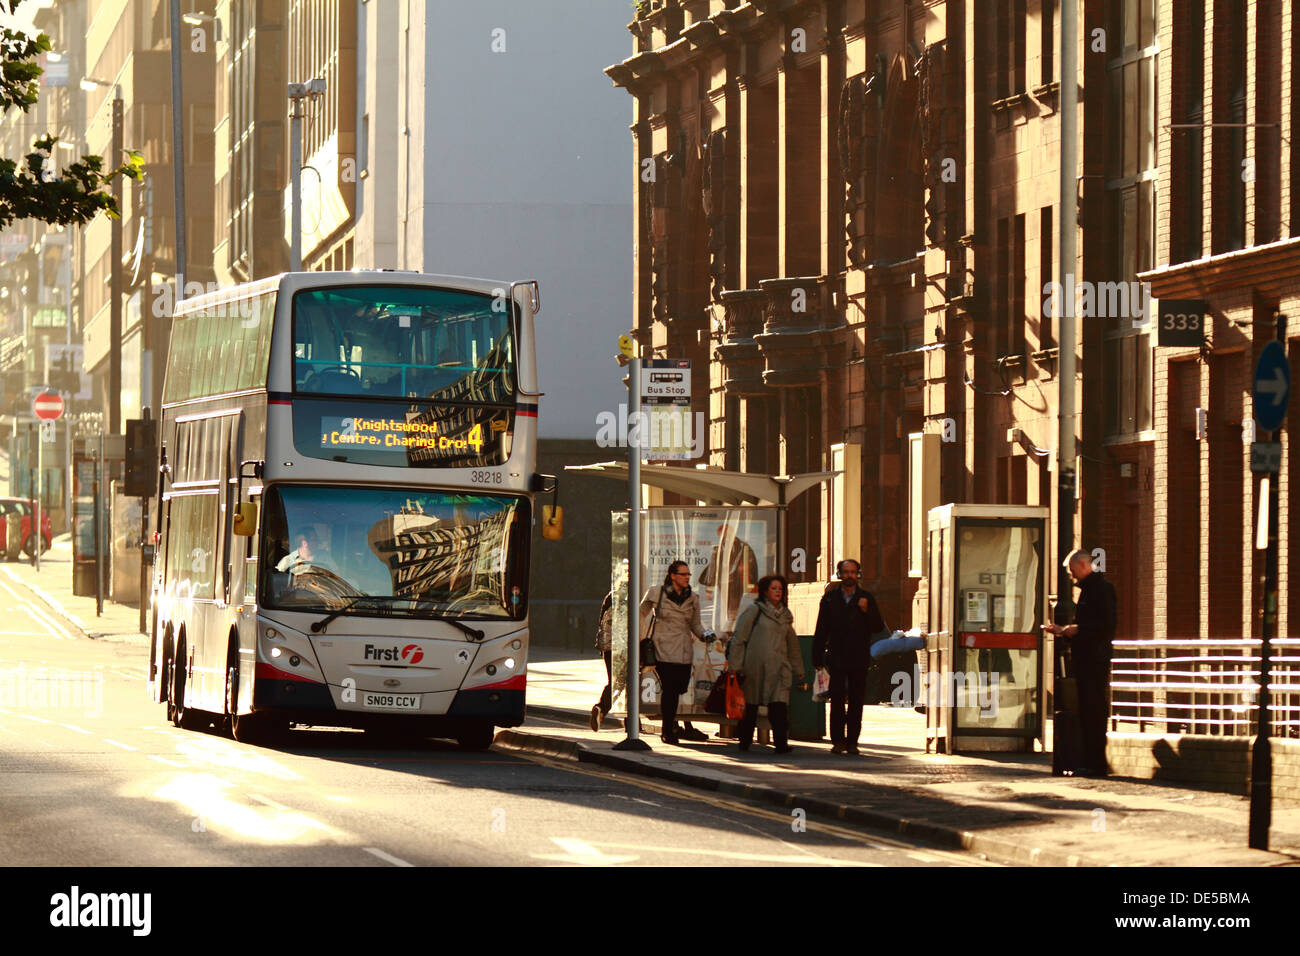 Number 4 First Bus Glasgow drops off passengers in Glasgow City Centre, in the morning sunlight Stock Photo